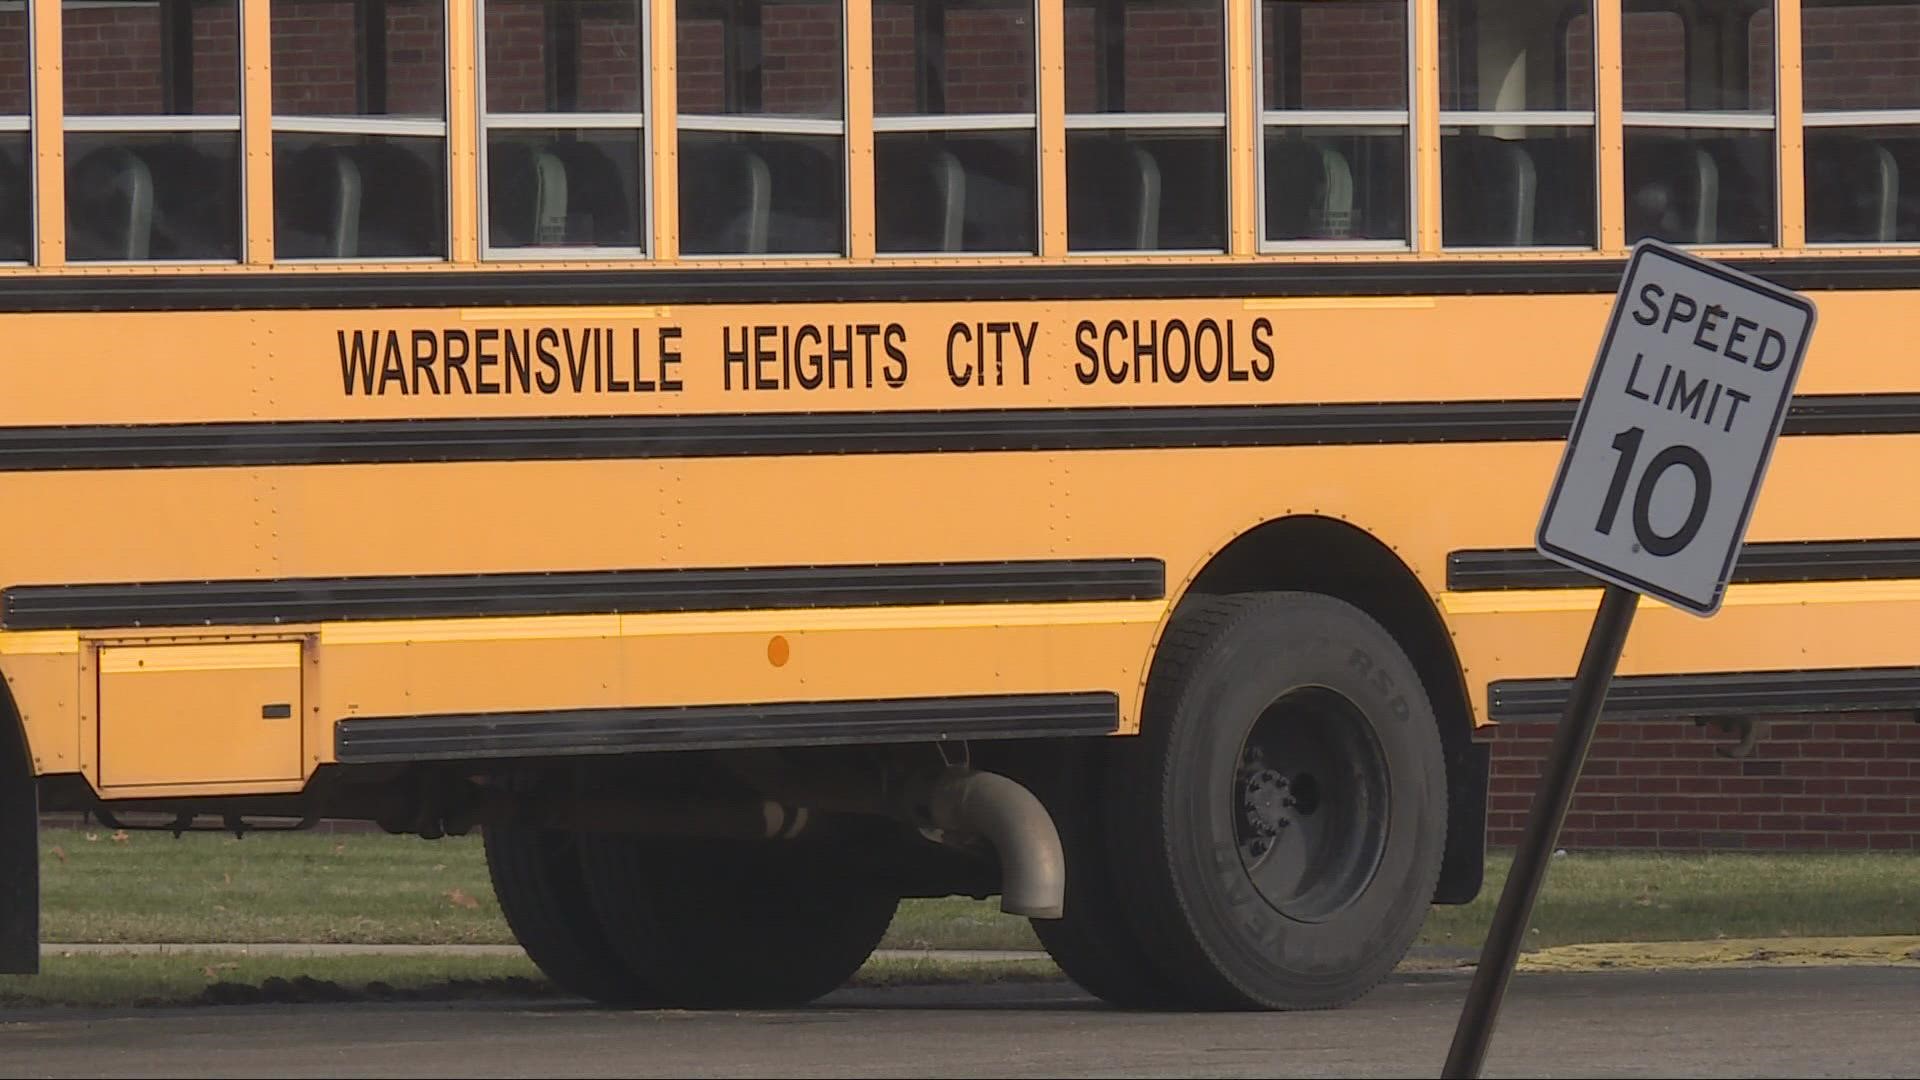 The court ruled that a 1997 tax-sharing agreement between the Beachwood City School District and the Warrensville Heights City School District is enforceable.